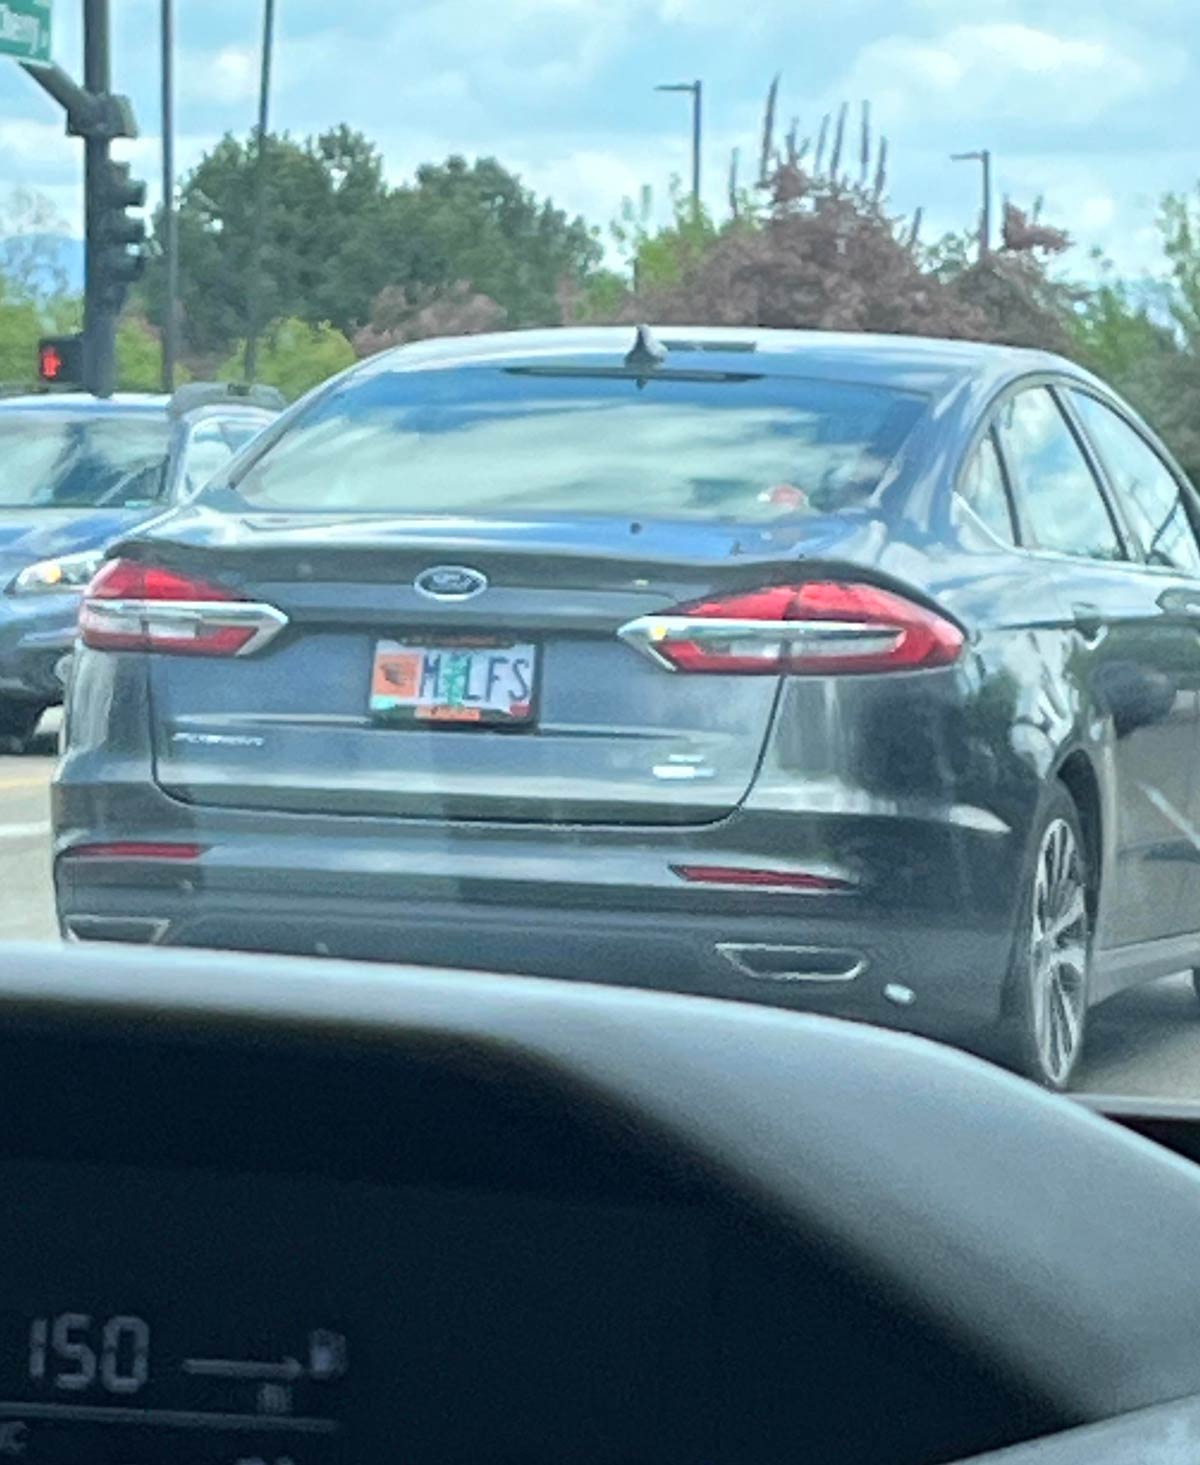 Creative use of the tree in this license plate we saw a few days ago